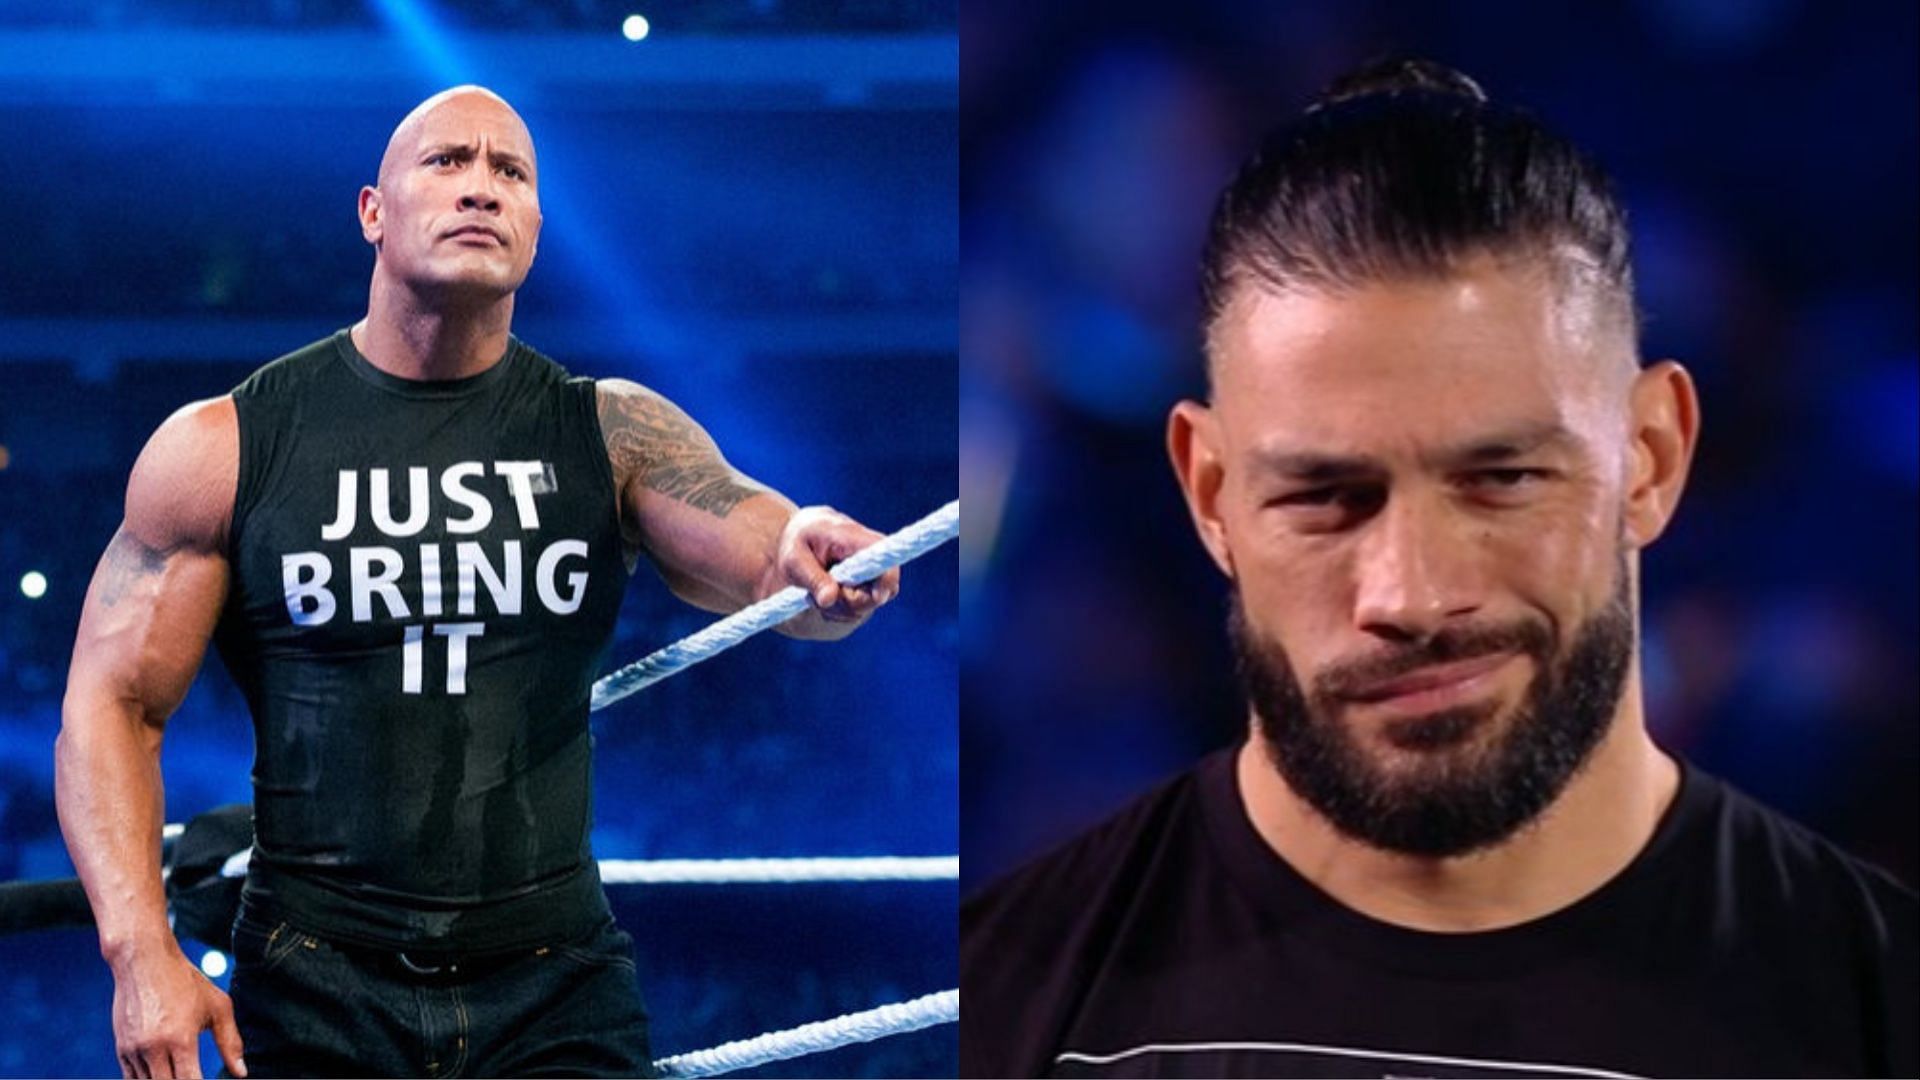 The Rock (left); Roman Reigns (right)